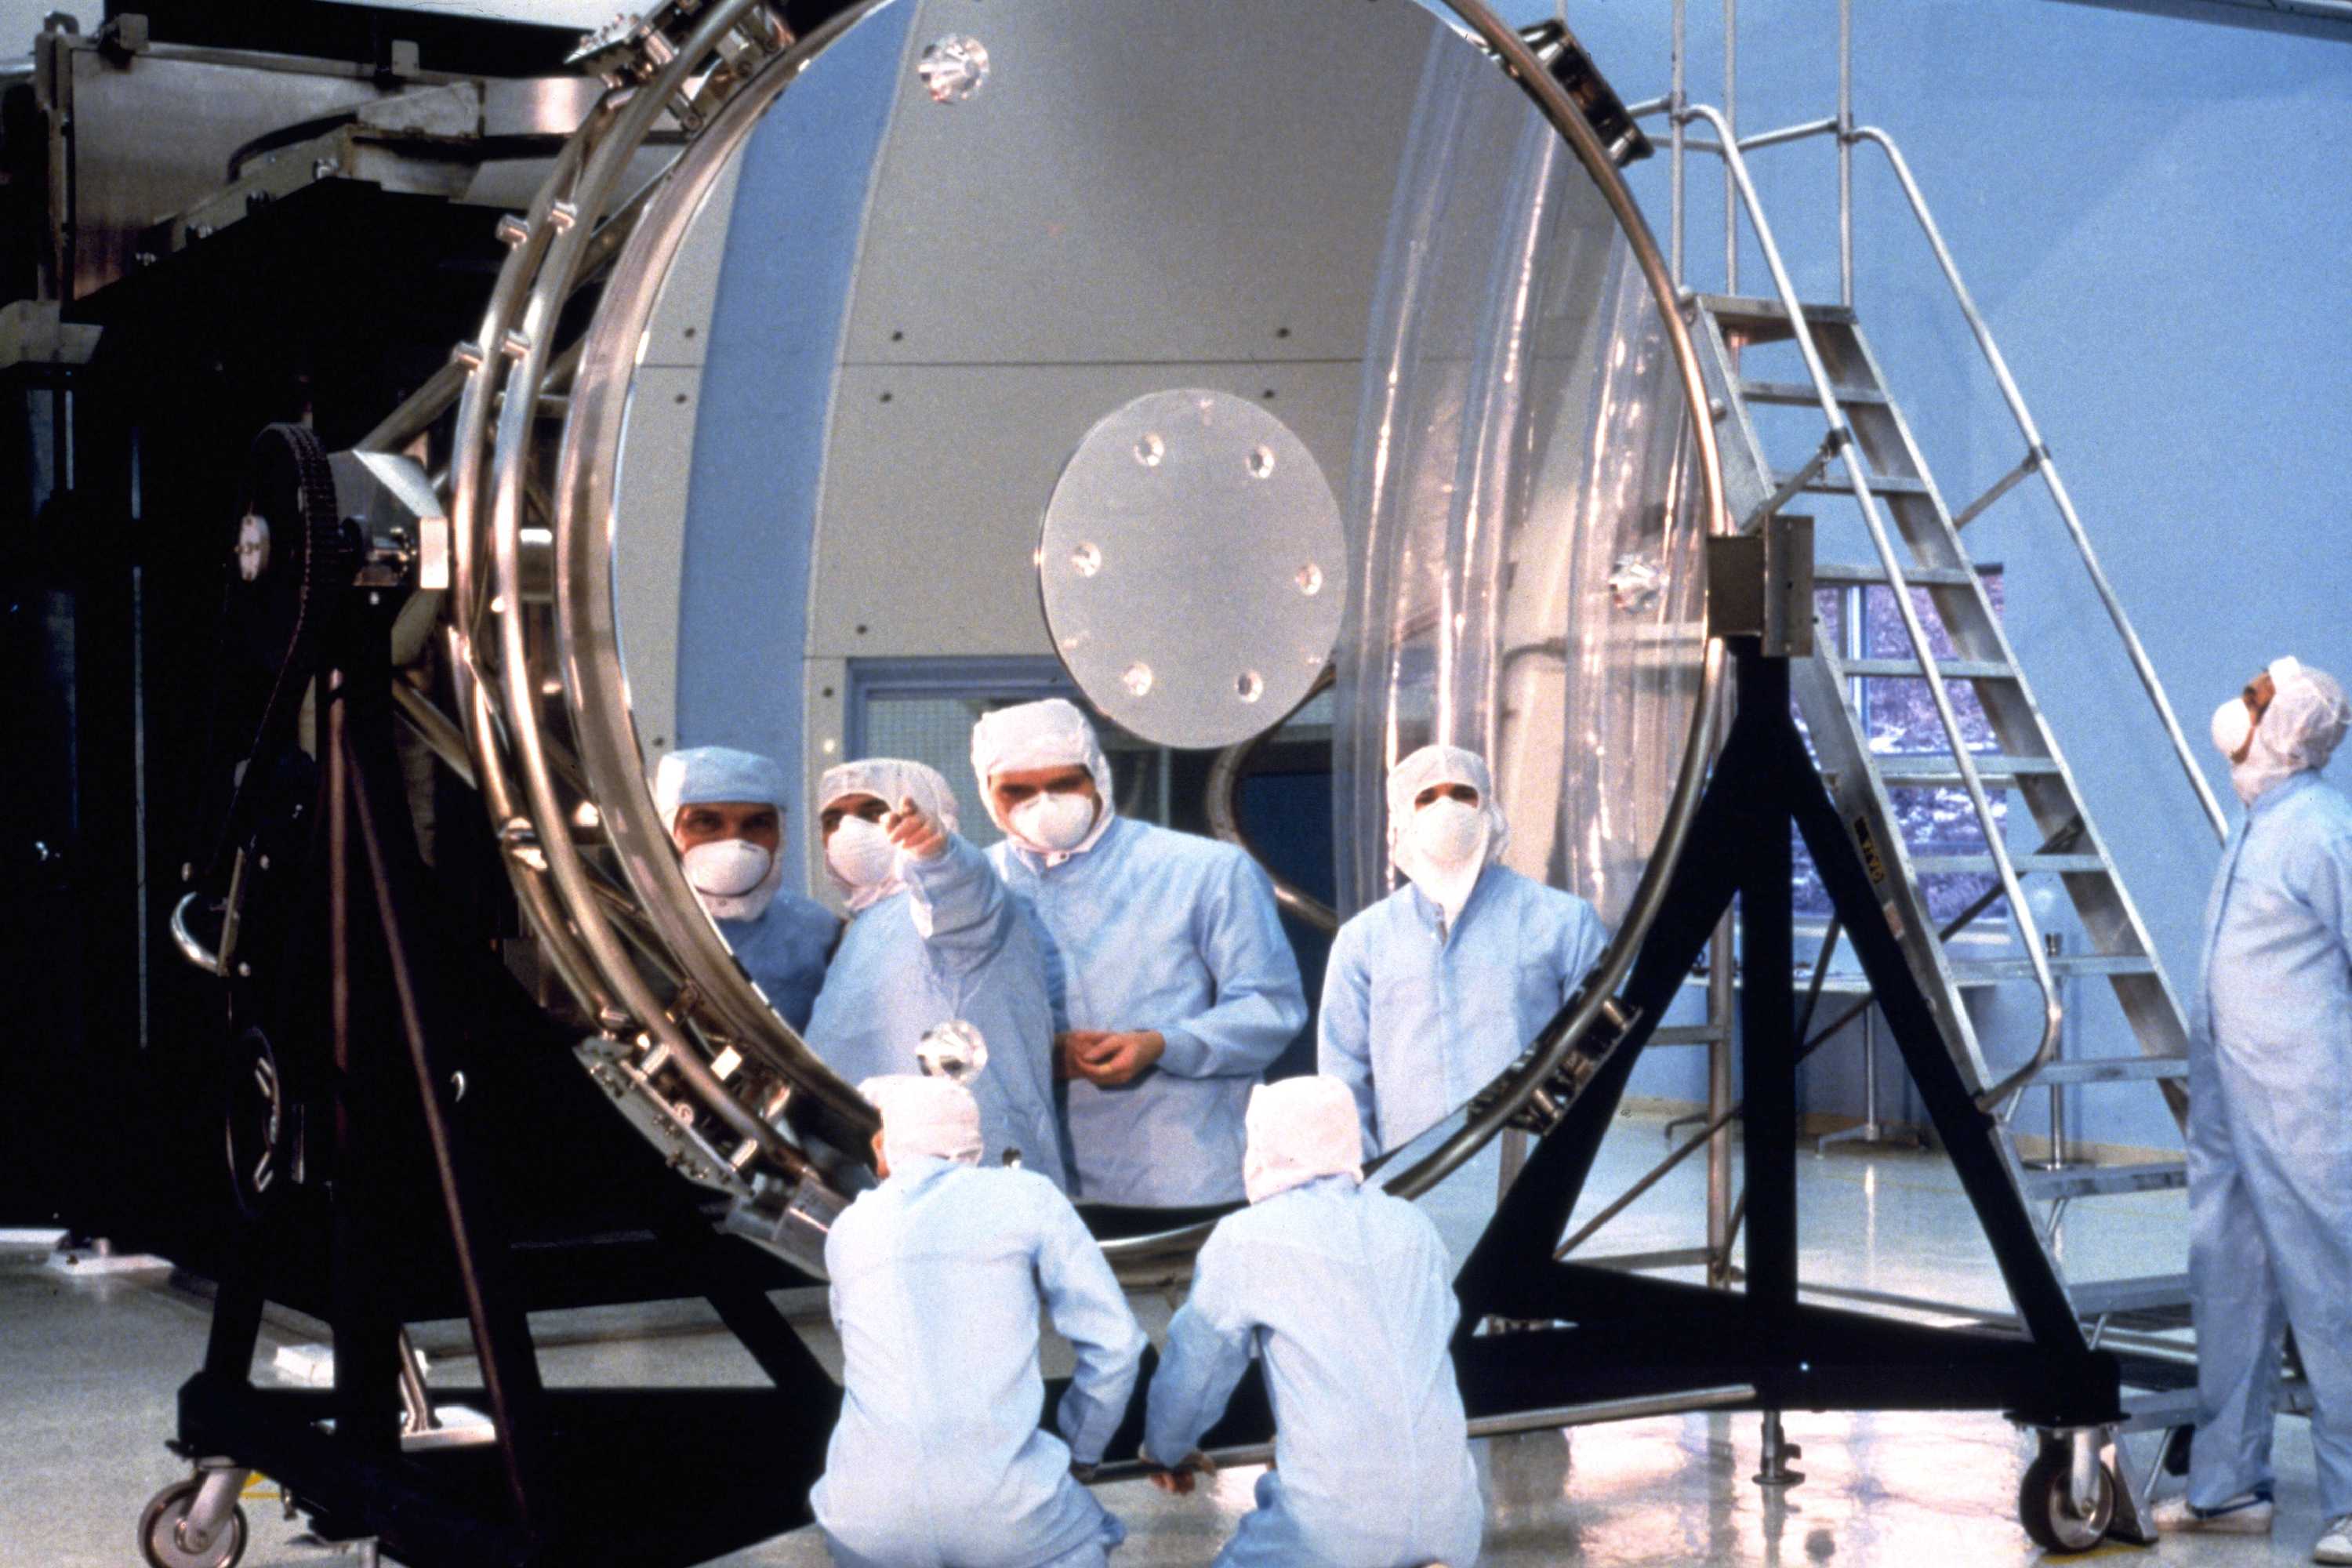 Engineers in clean room suits inspect Hubble's primary mirror as you see their reflection in it.